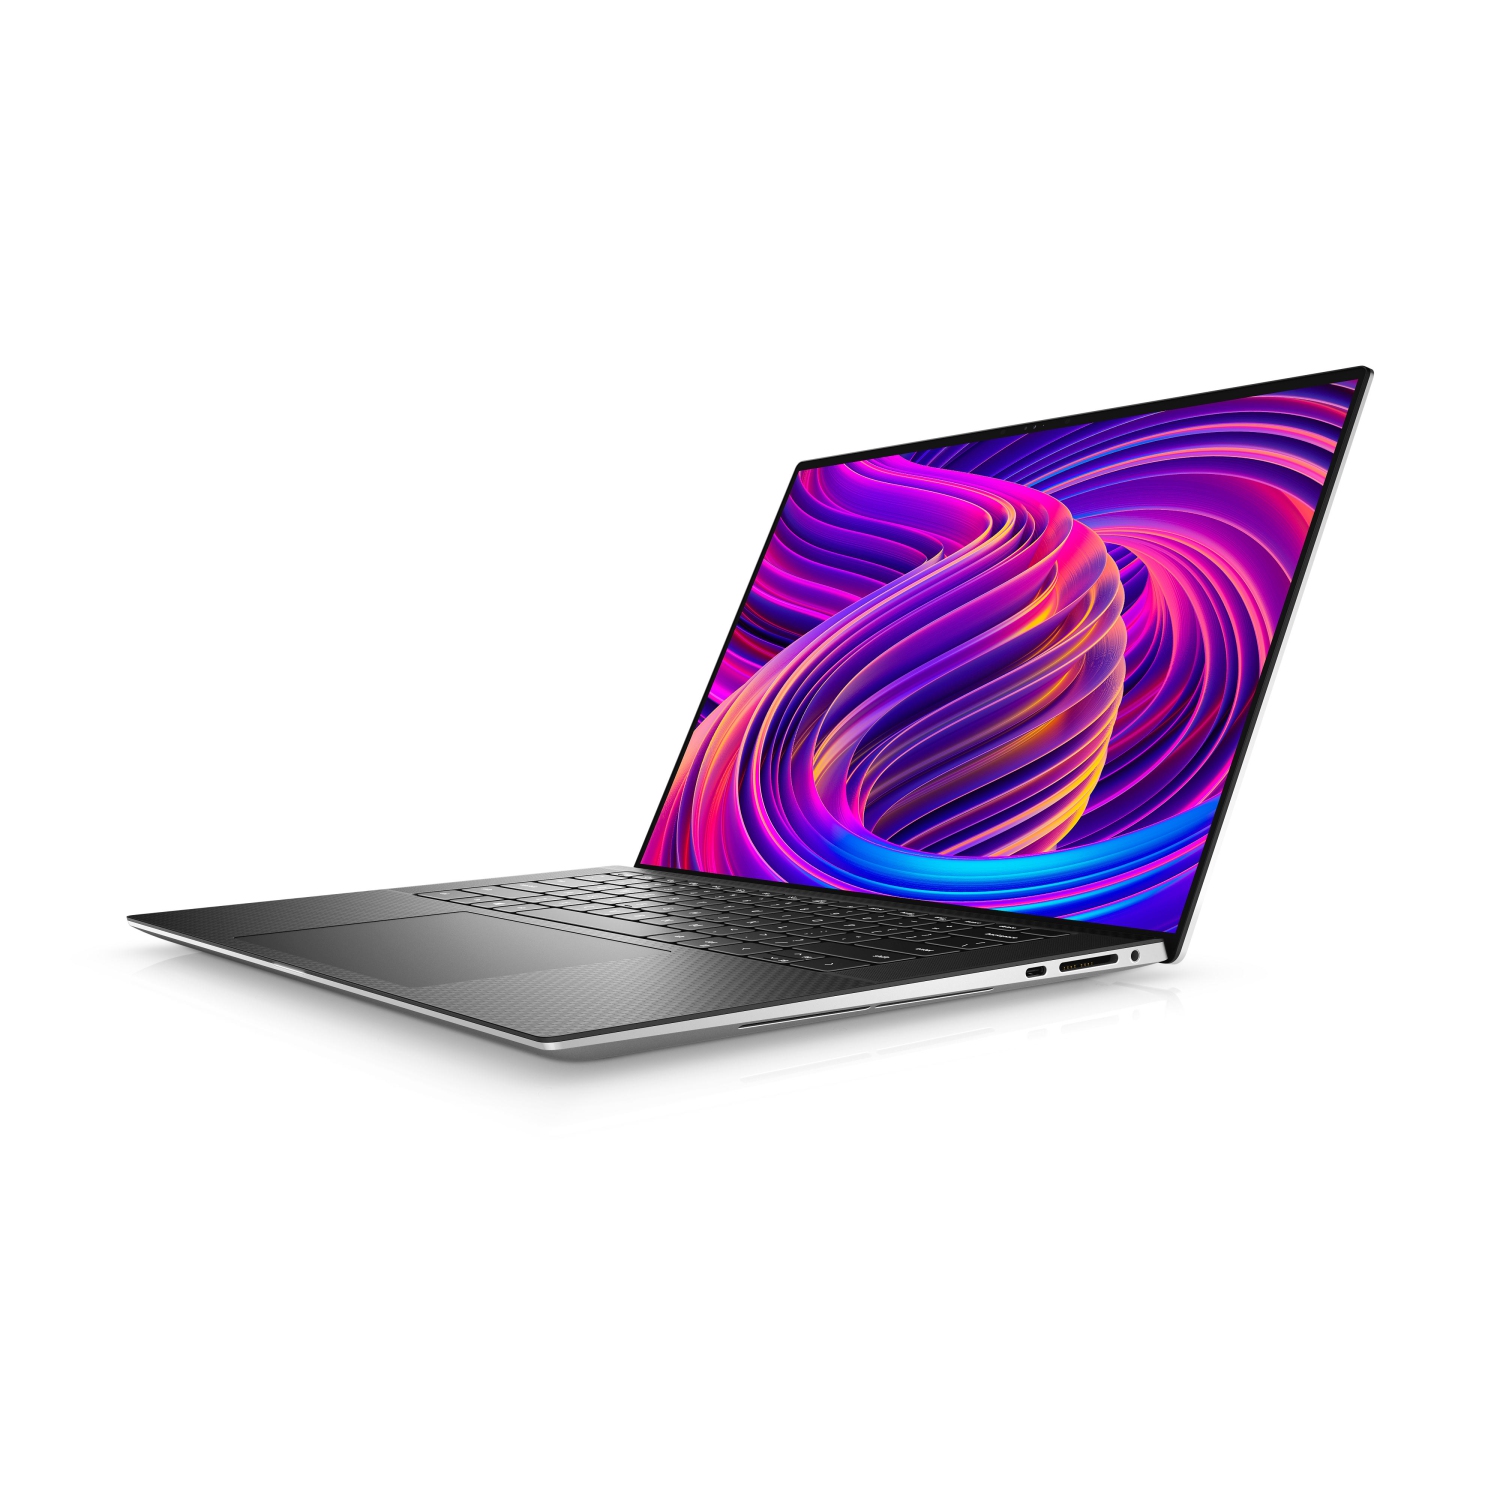 Refurbished (Excellent) - Dell XPS 15 9510 Laptop (2021), 15.6" 4K Touch, Core i7 - 2TB SSD - 64GB RAM - 3050 Ti, 8 Cores @ 4.6 GHz - 11th Gen CPU Certified Refurbished